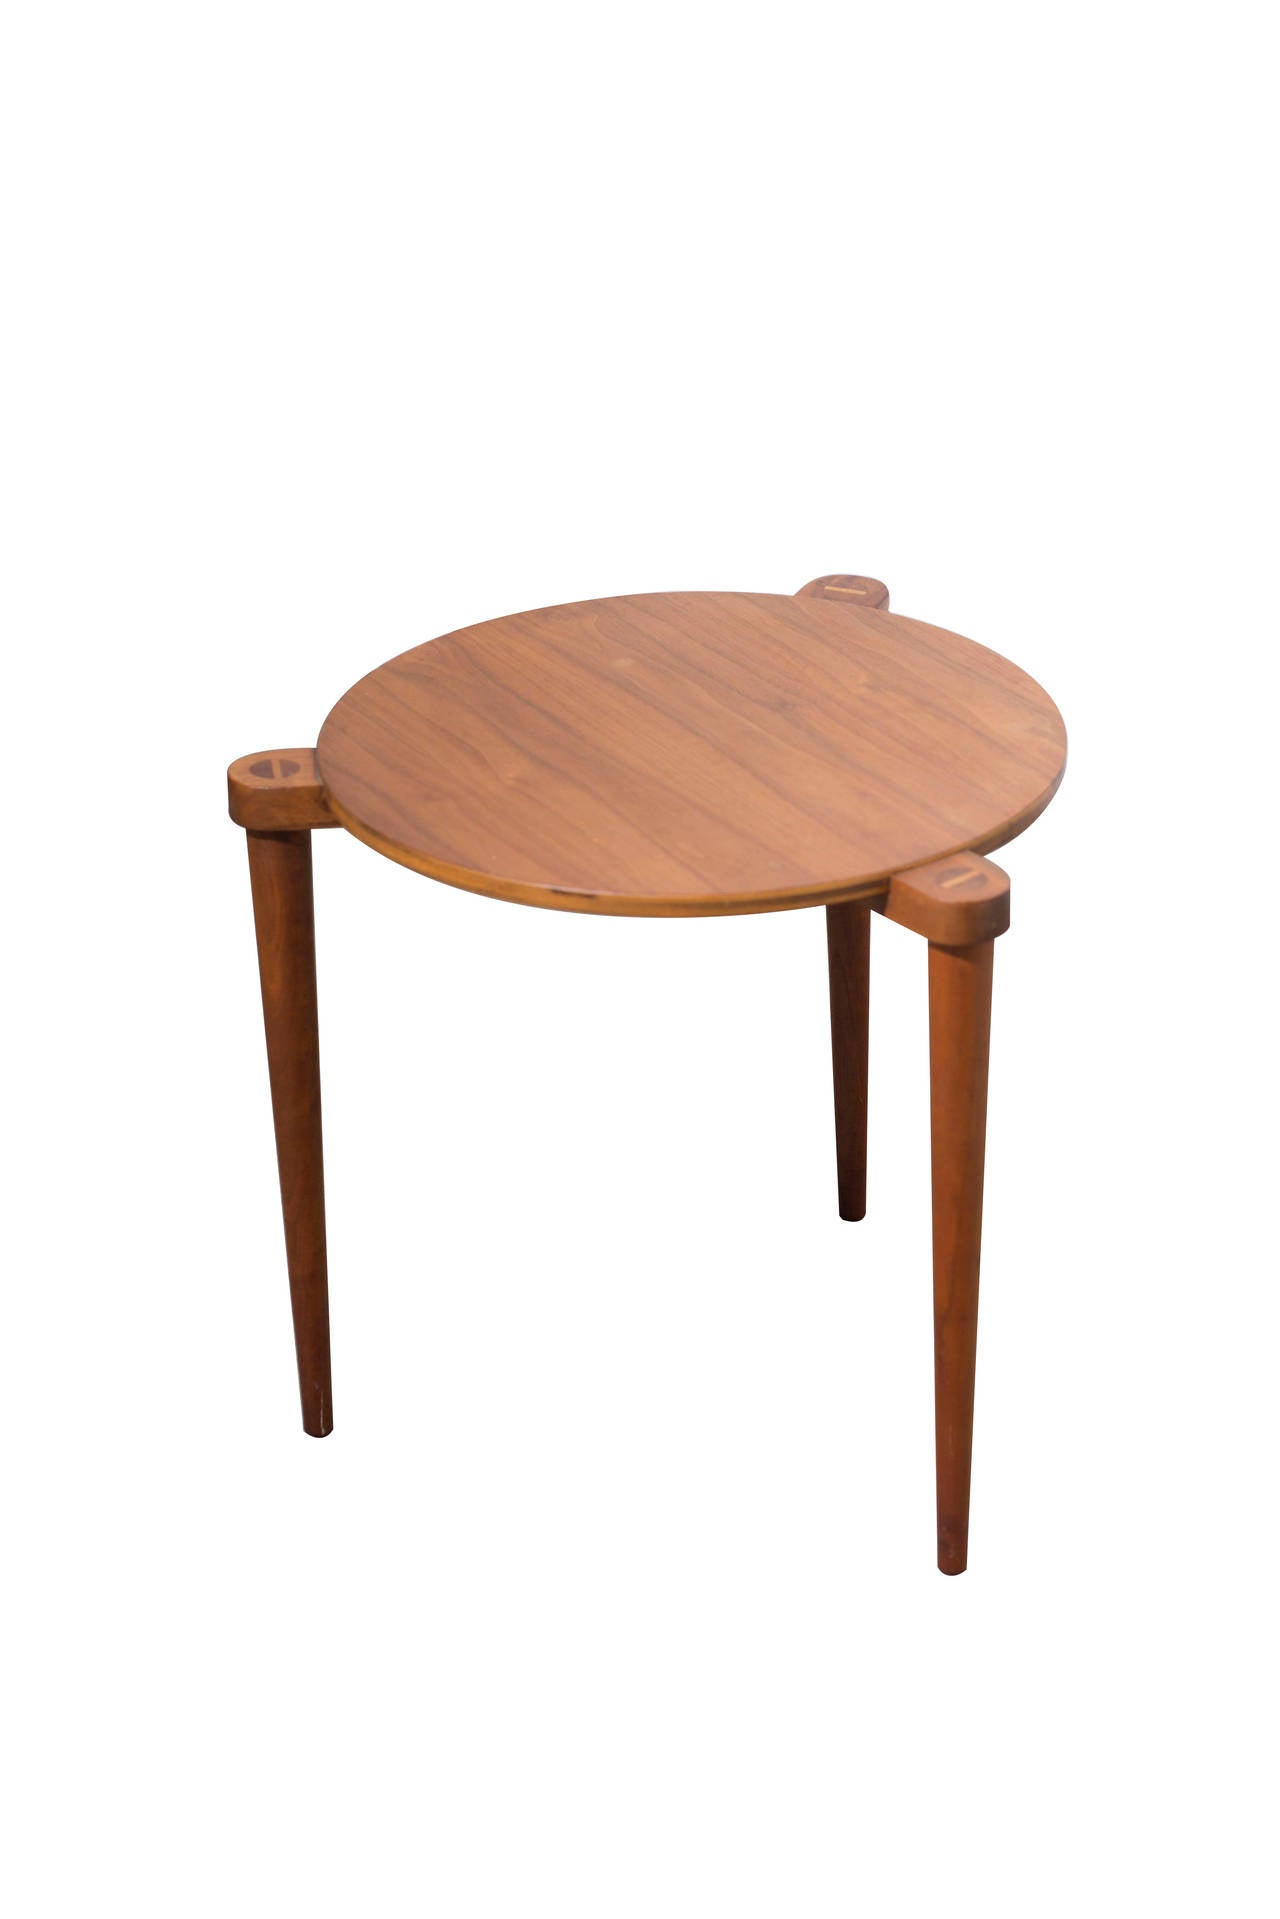 Trio of Danish Side Tables in Style of Finn Juhl In Excellent Condition For Sale In Miami, FL